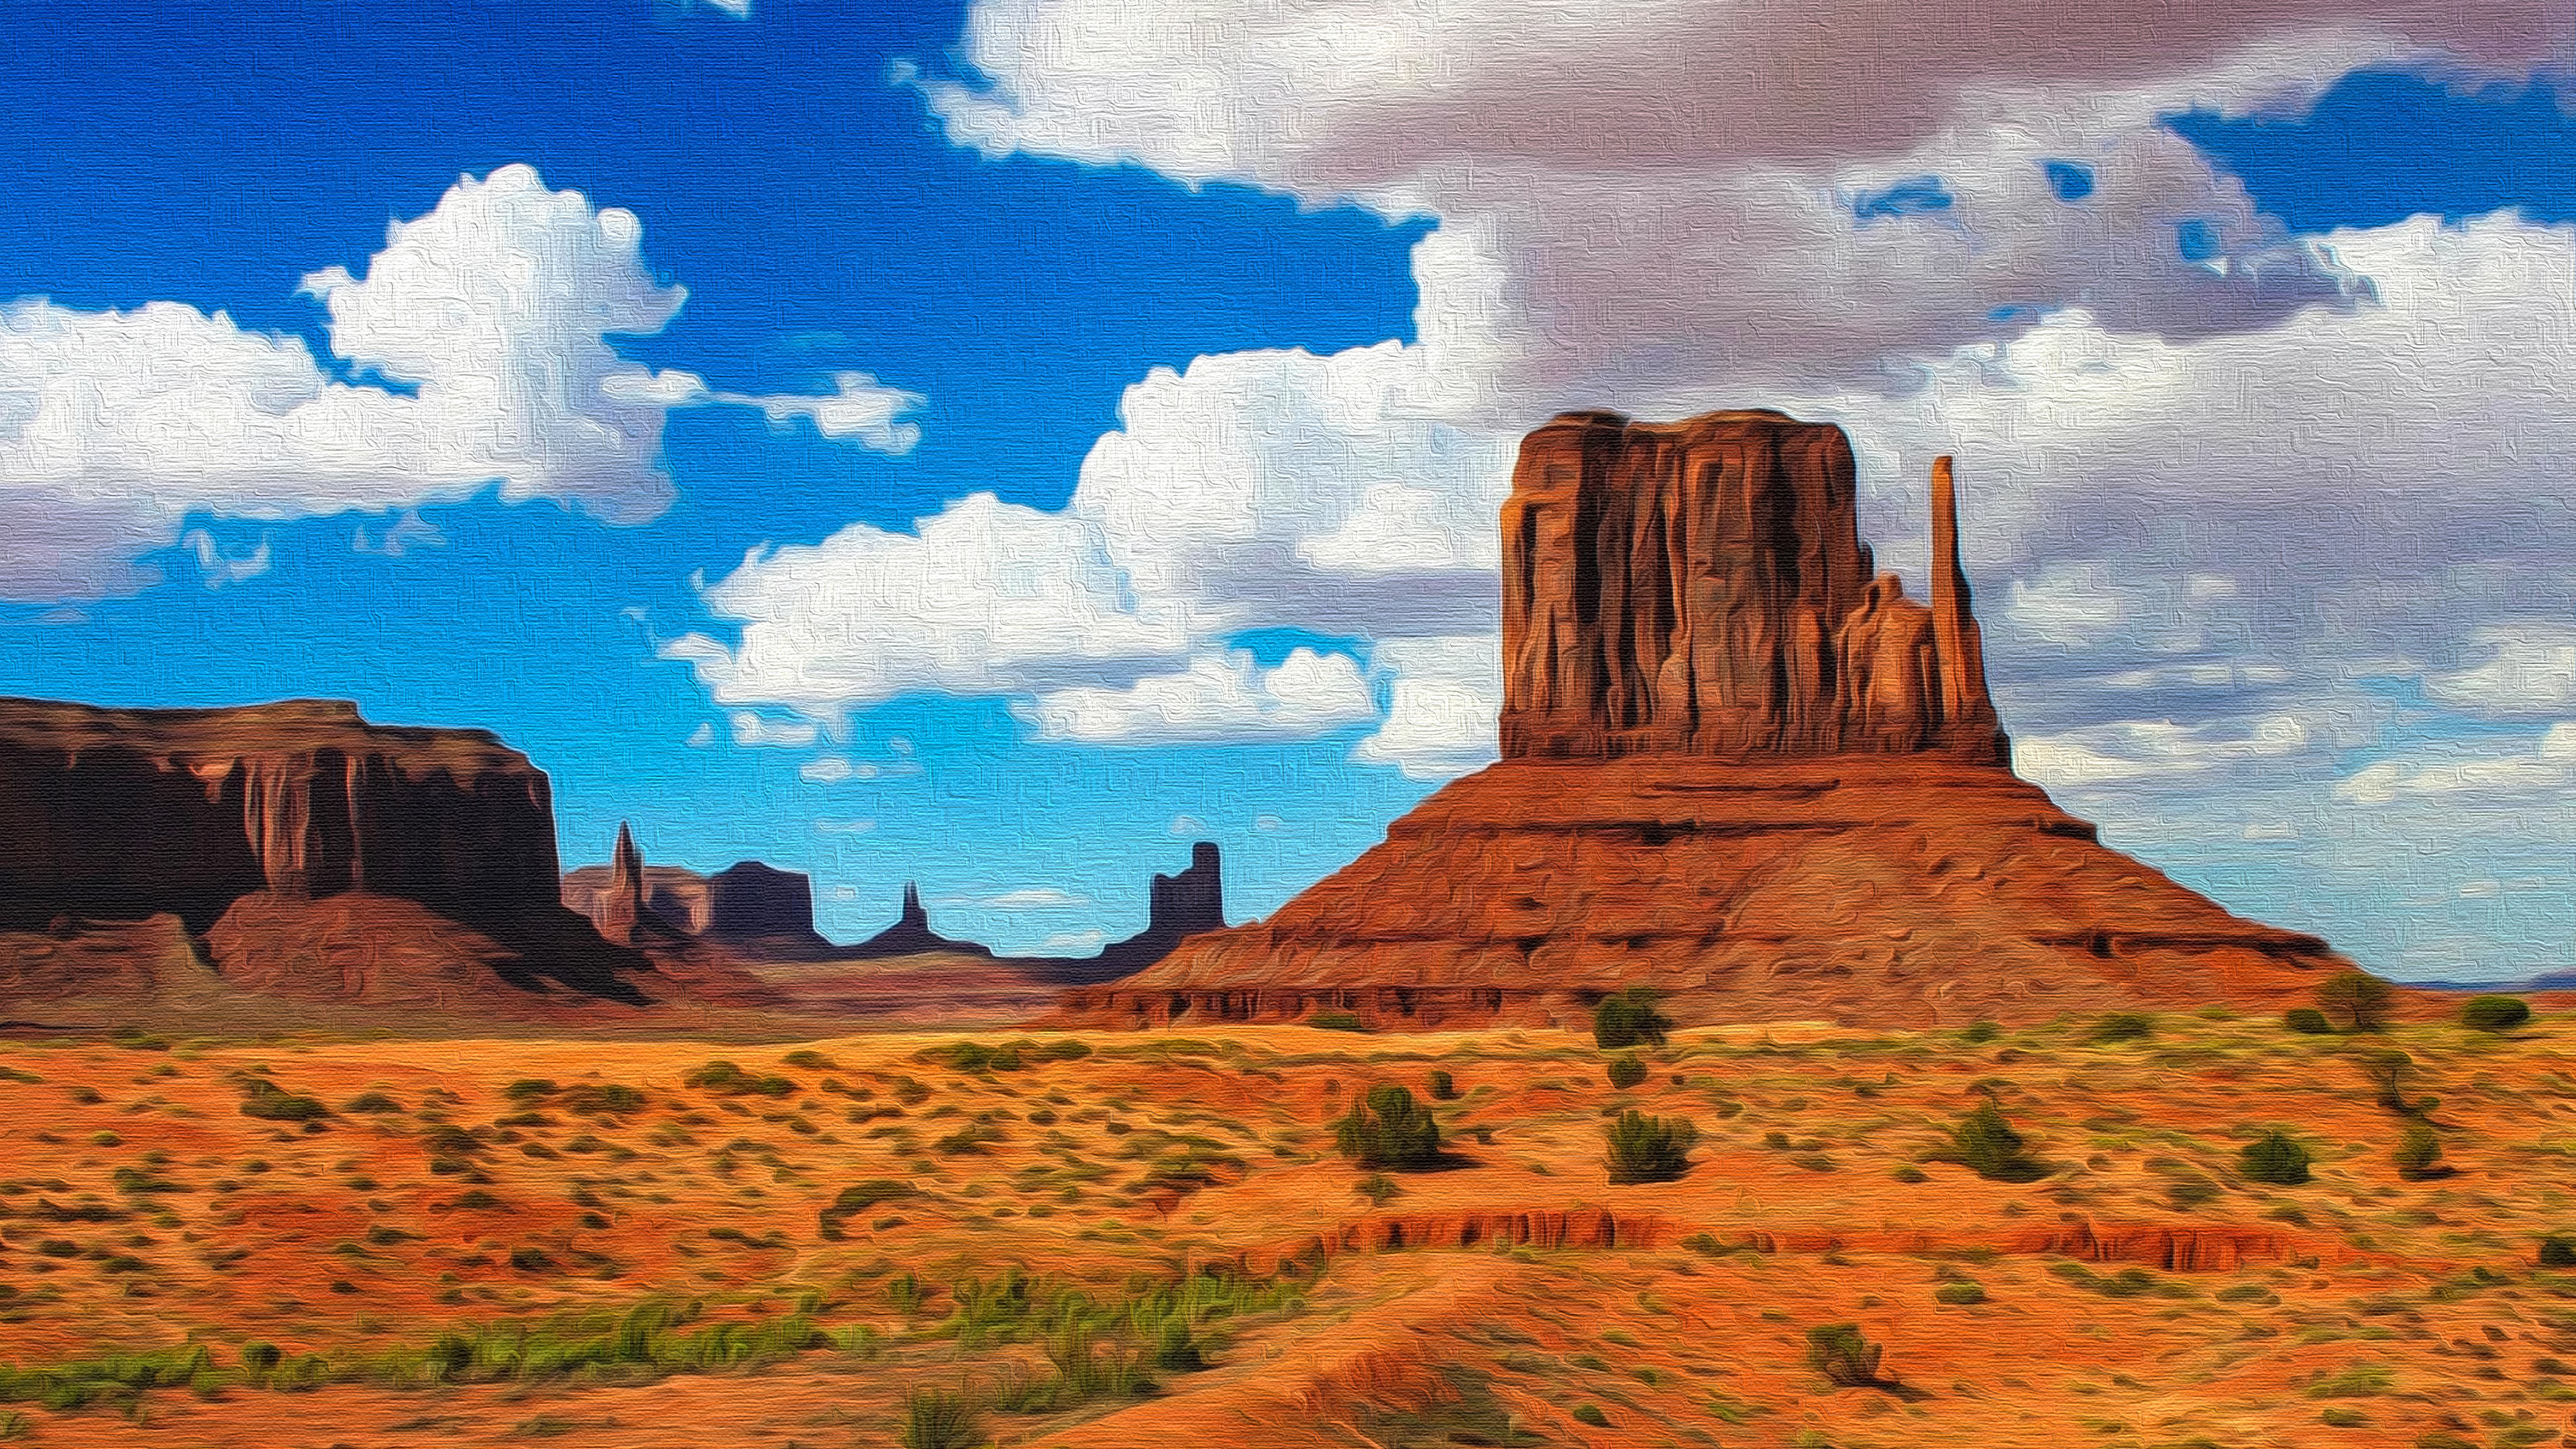 Artistic Monument Valley 3840x2160